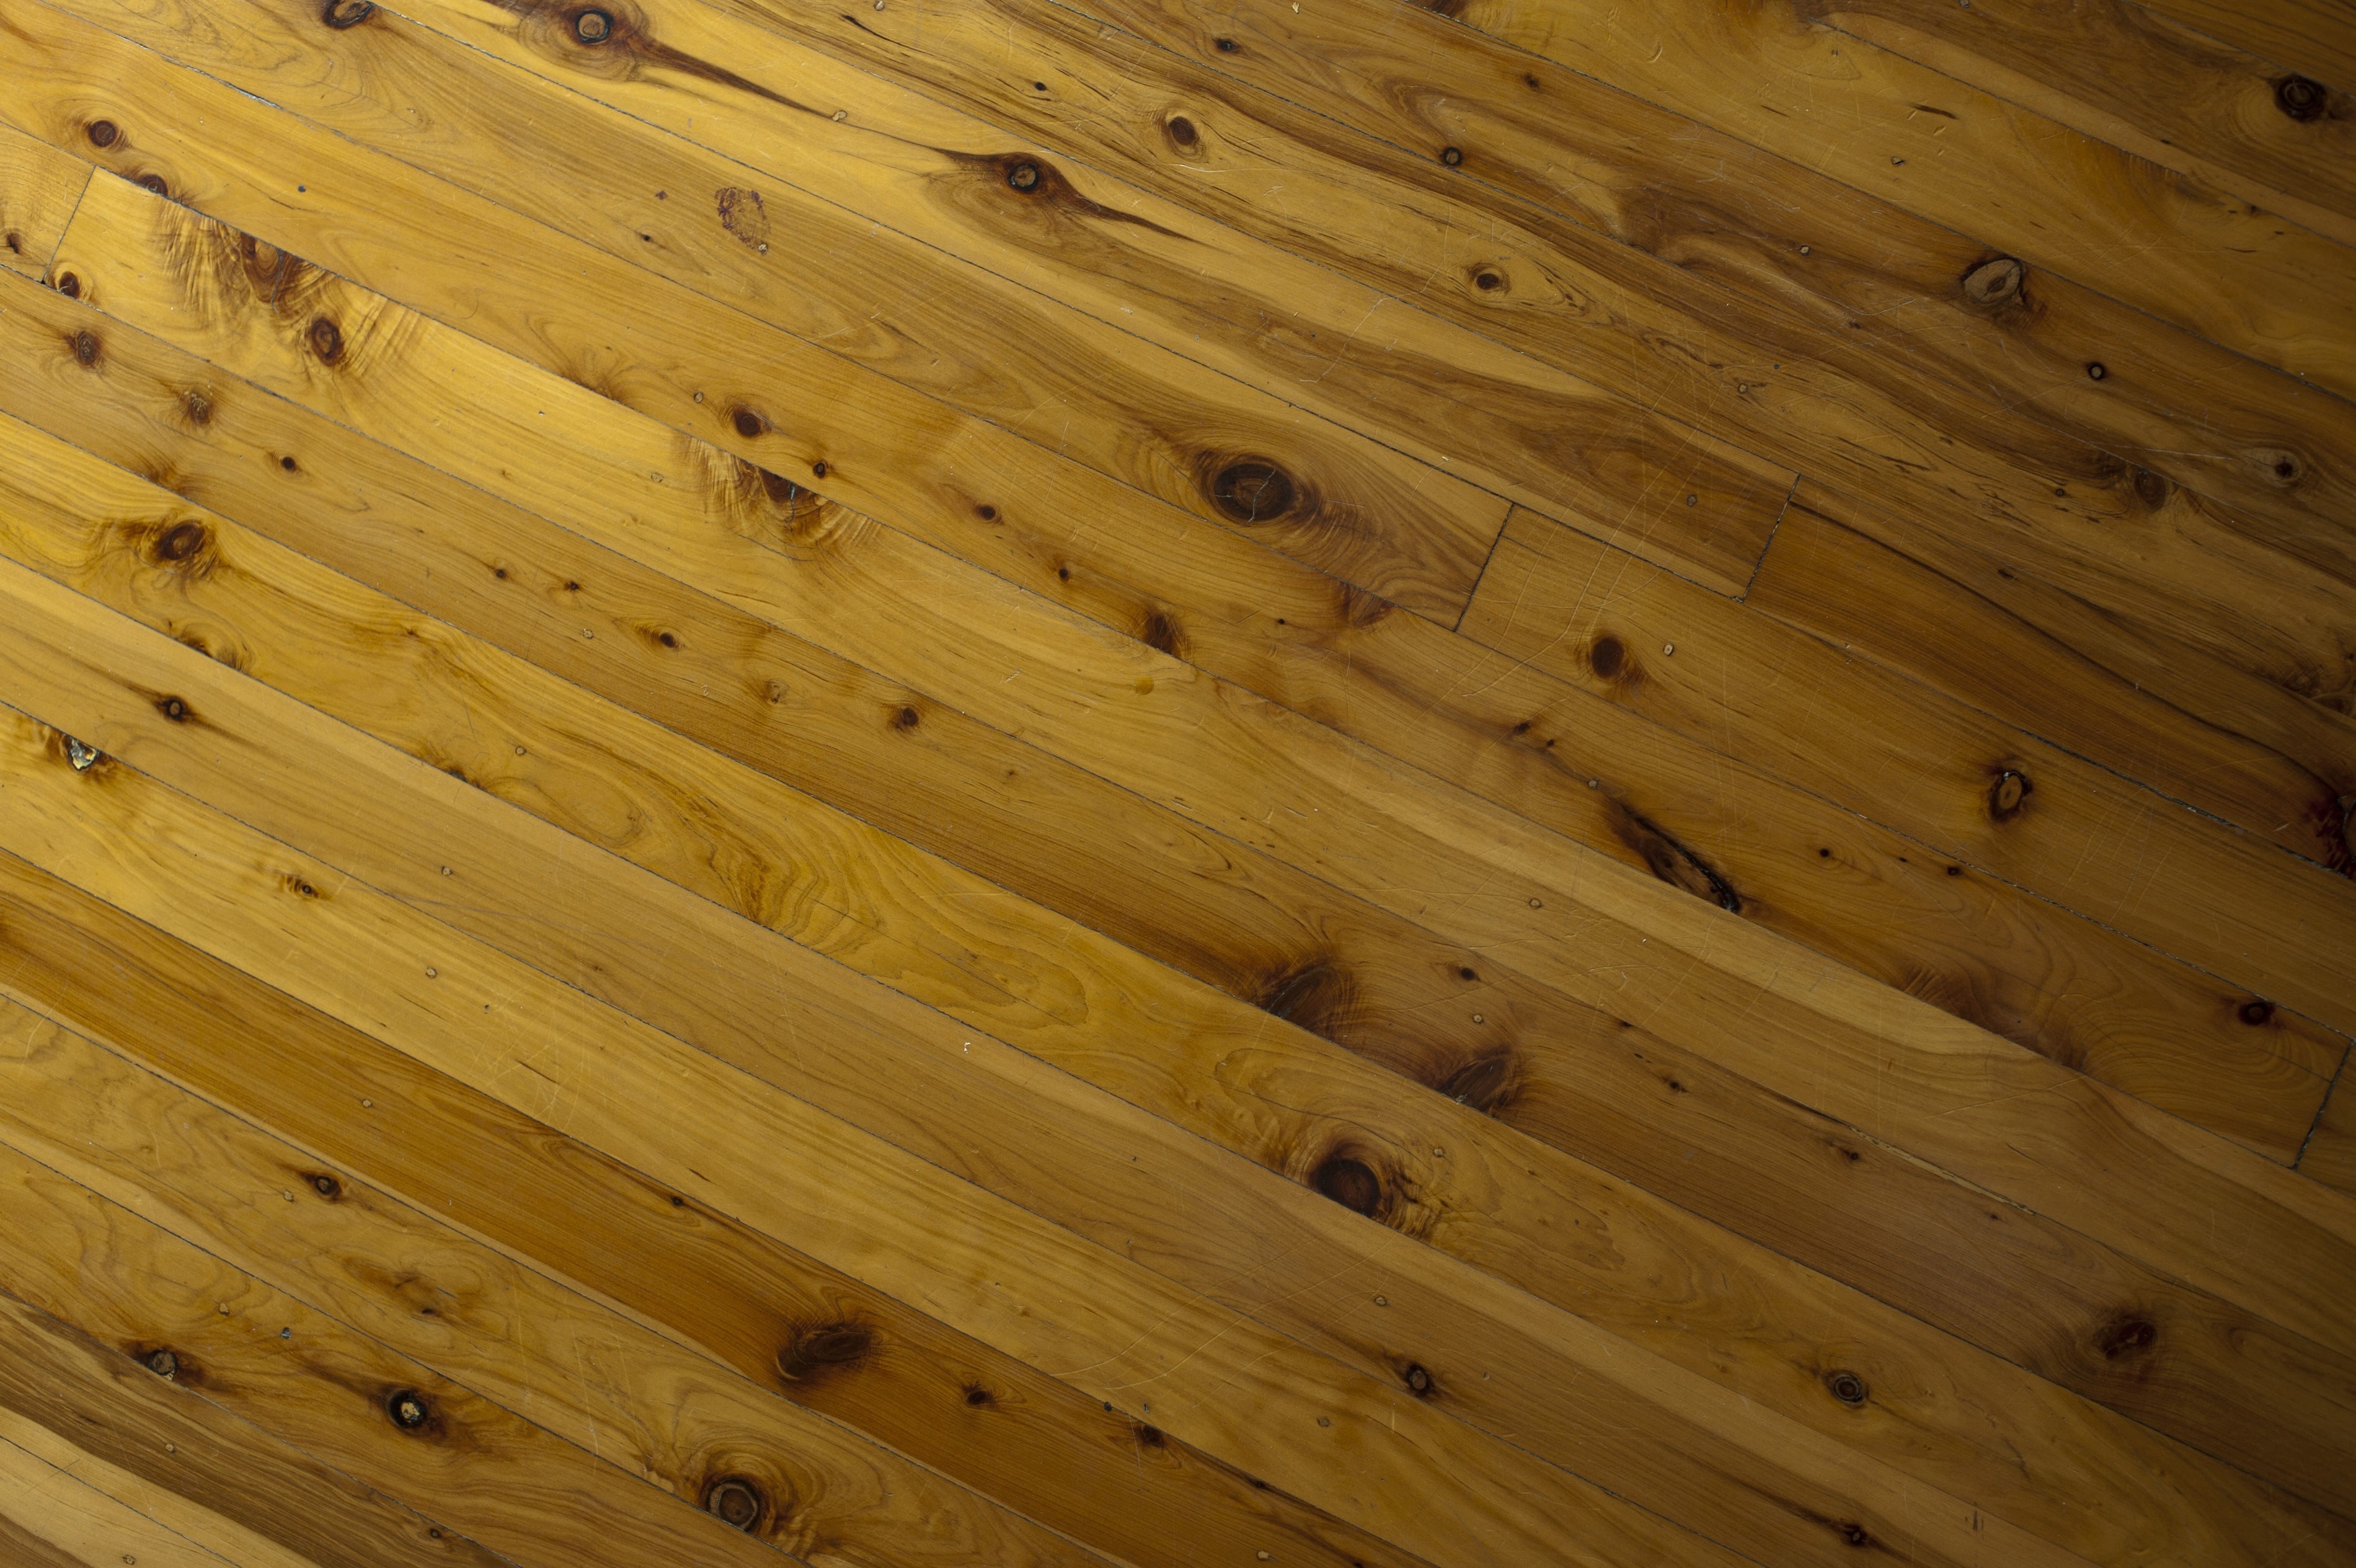 angled wood surface | Free backgrounds and textures | Cr103.com